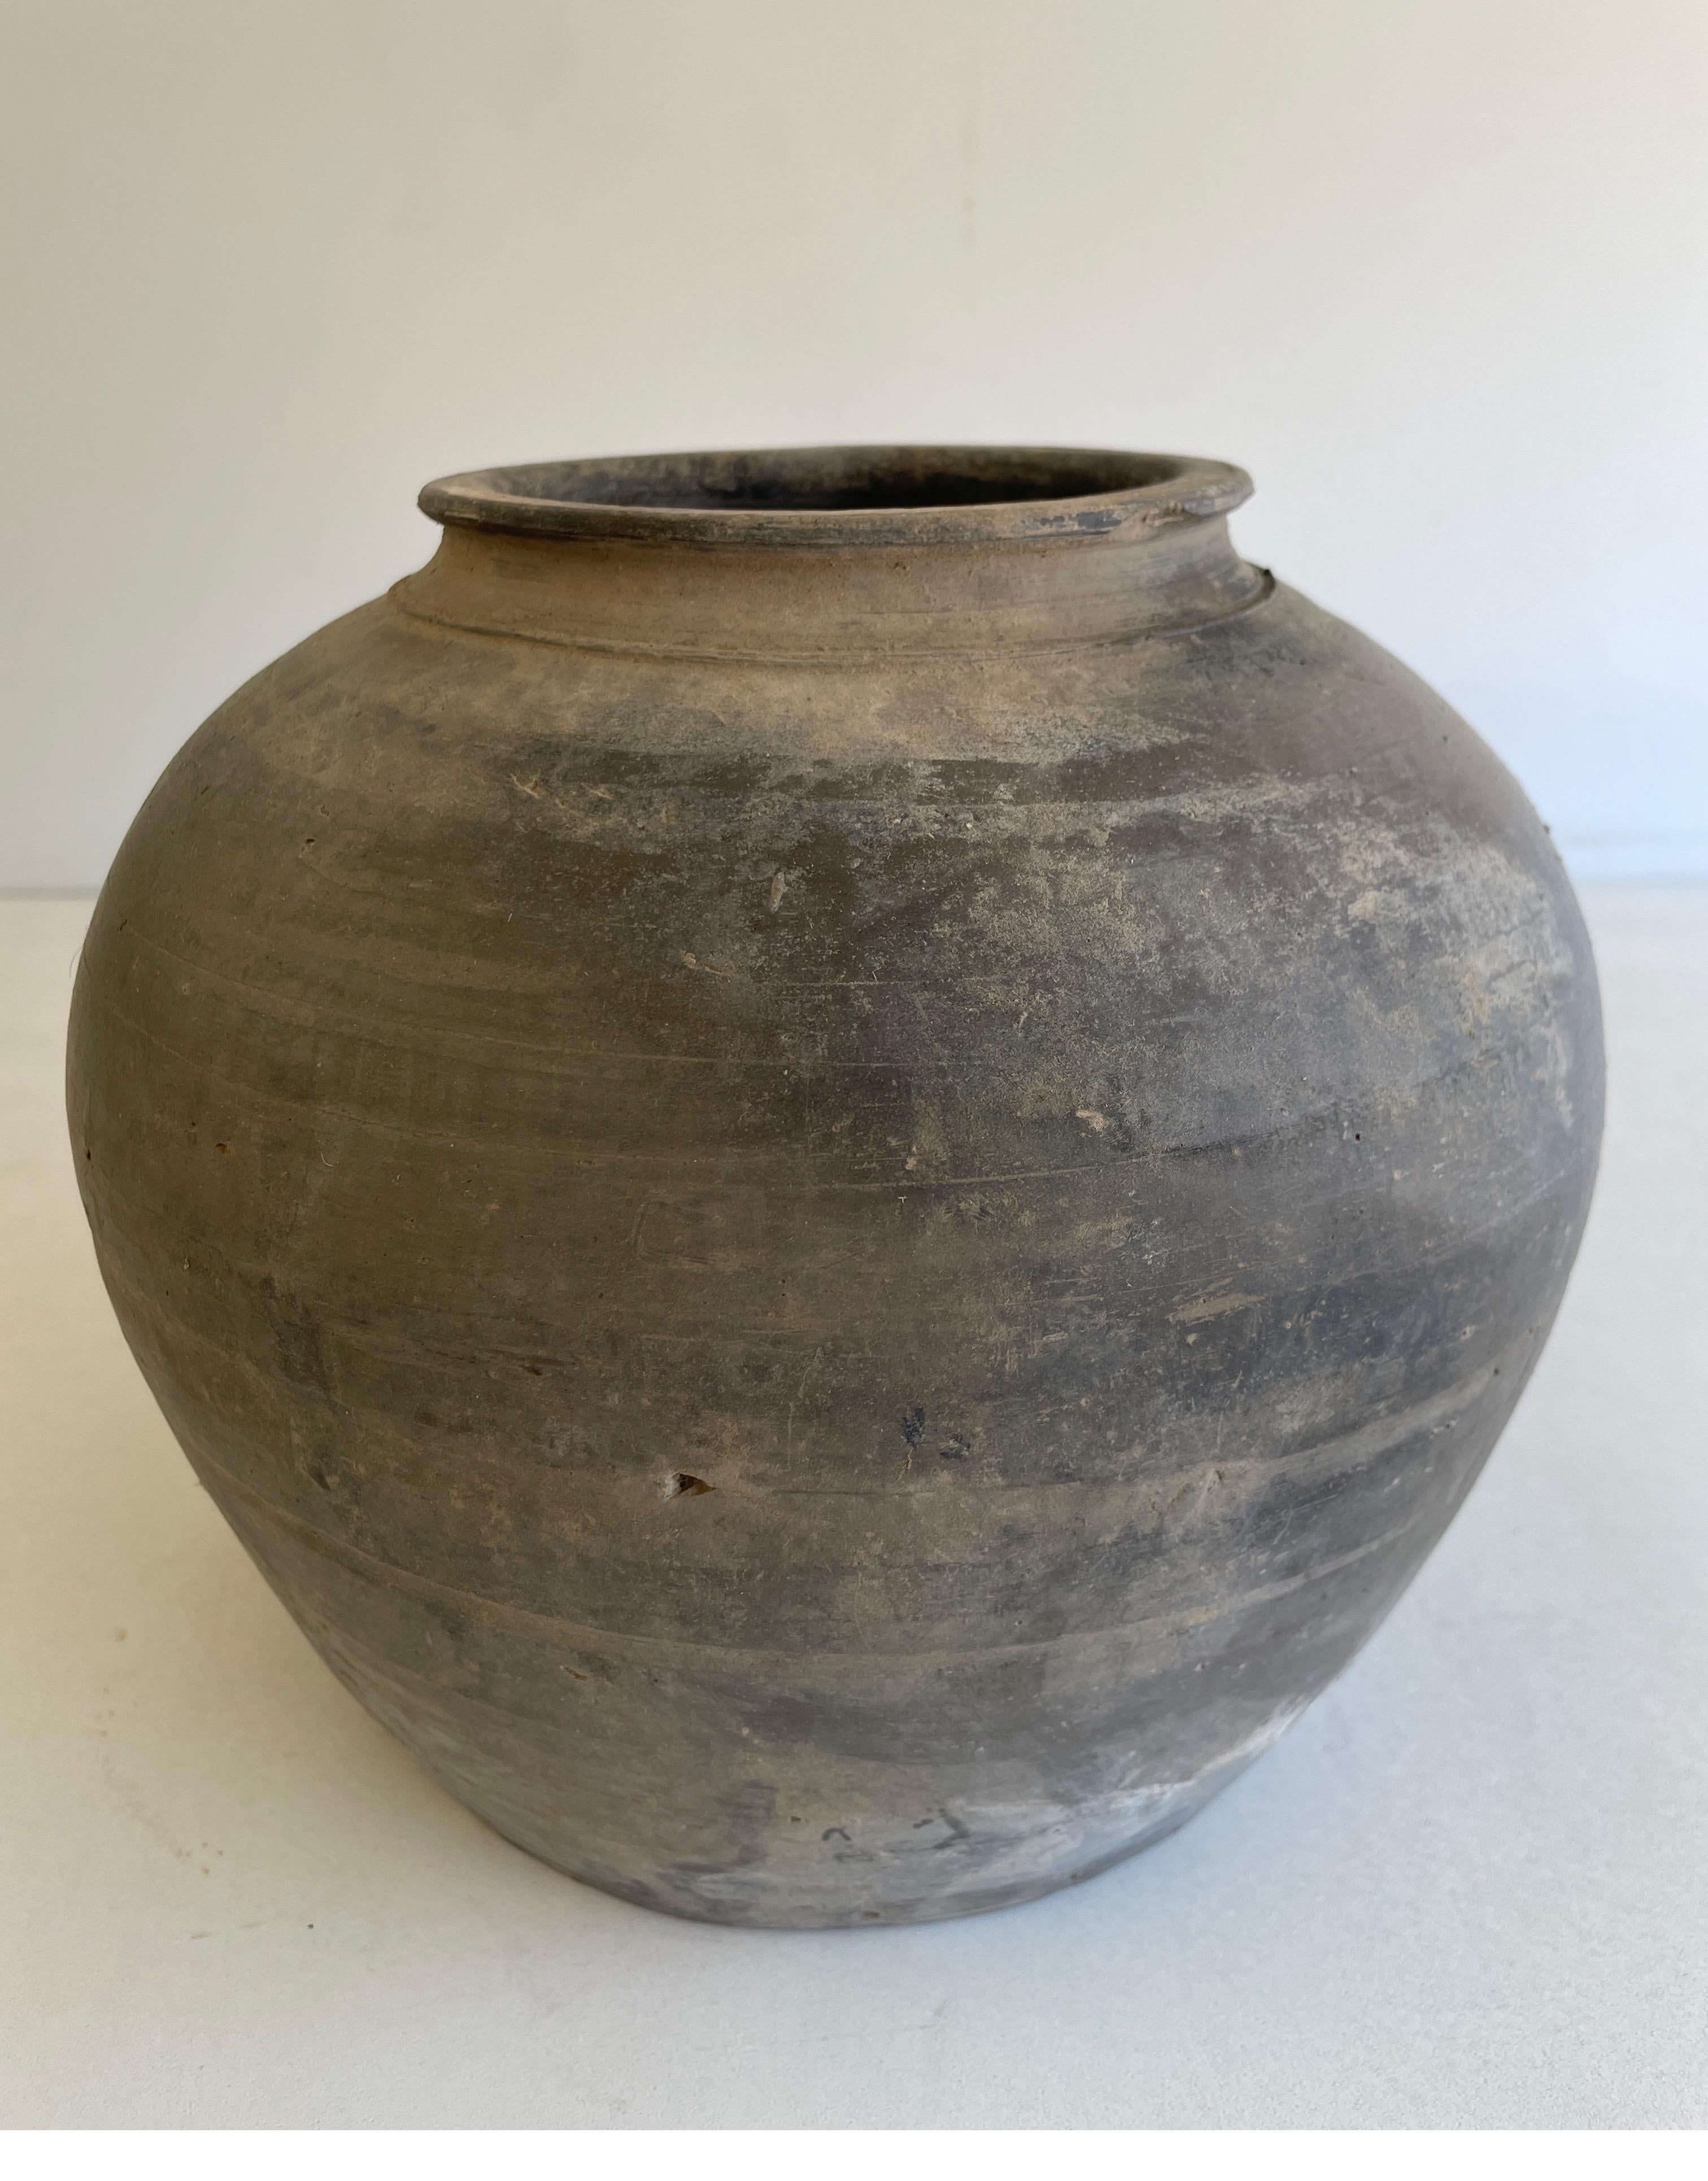 Vintage pottery beautiful and rich in character, this vintage oil pot adds just the right amount of texture + warmth where you need it. Stunning faded black/ brown unglazed finish with warm terra-cotta accents. Some have a more faded appearance than